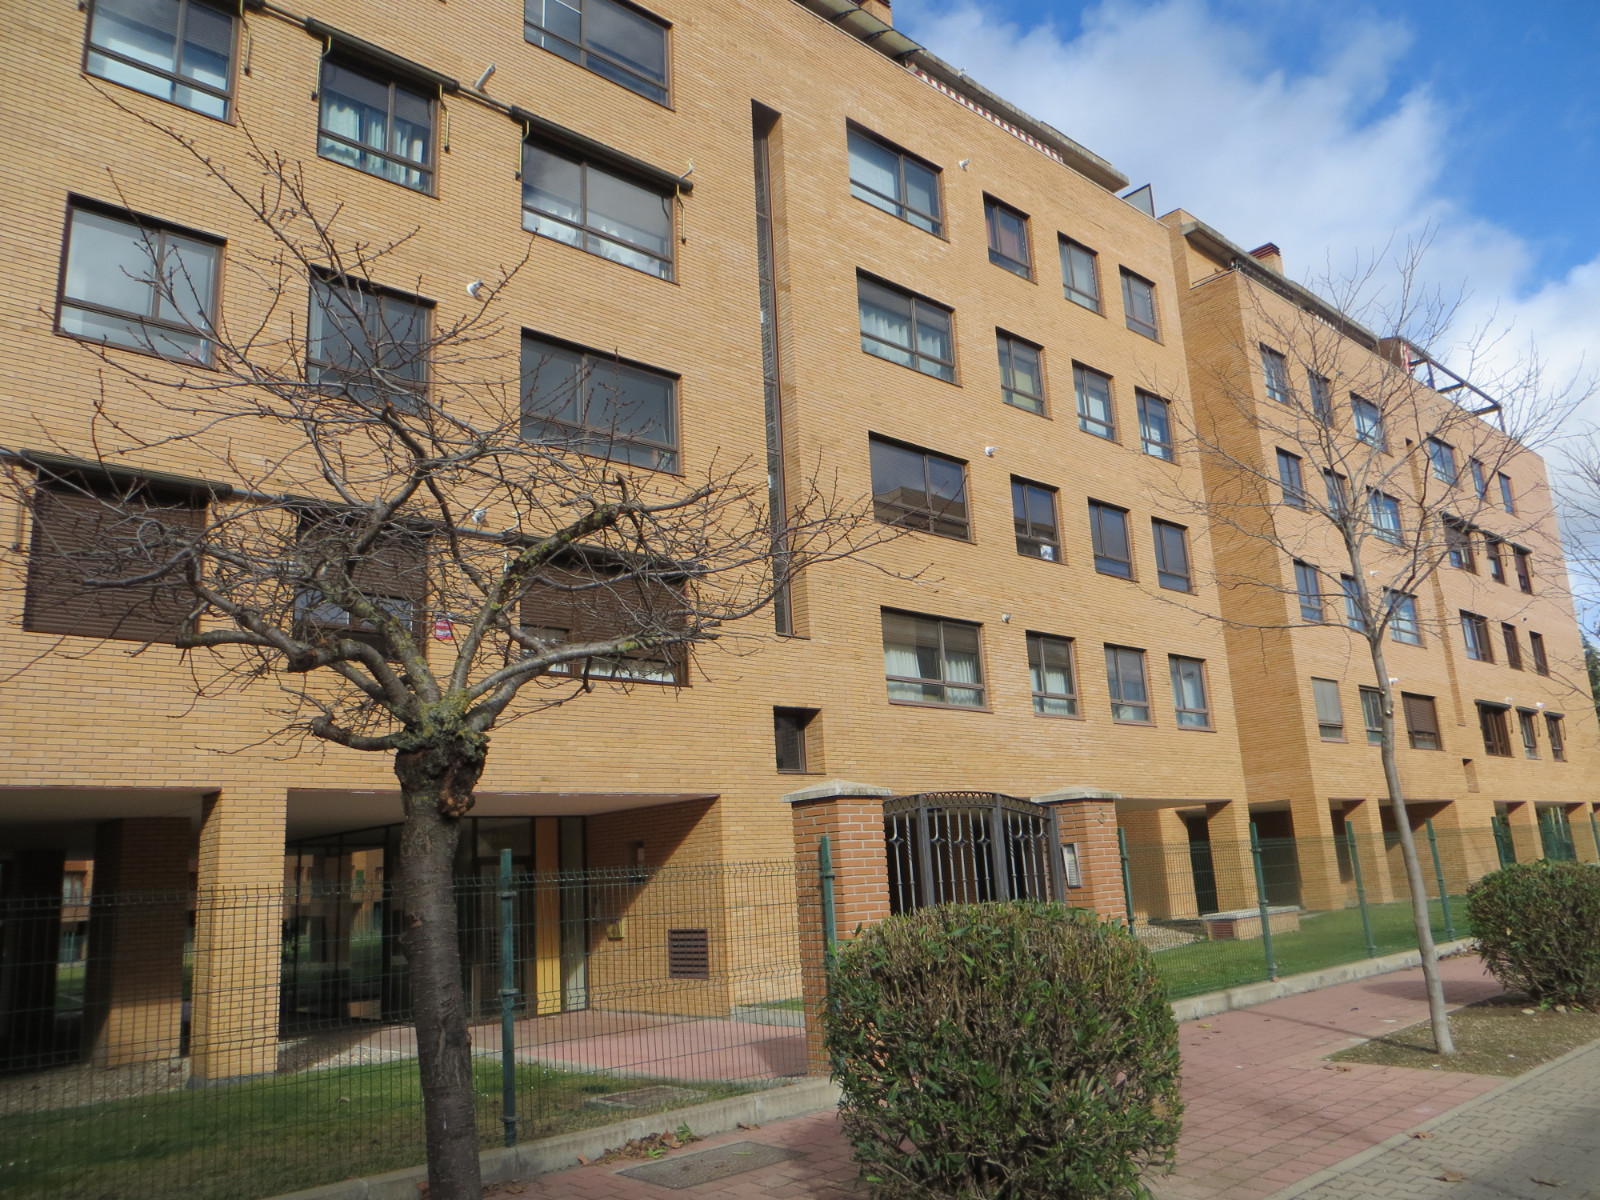 Flat for sale in Hospital Nuevo, Valladolid